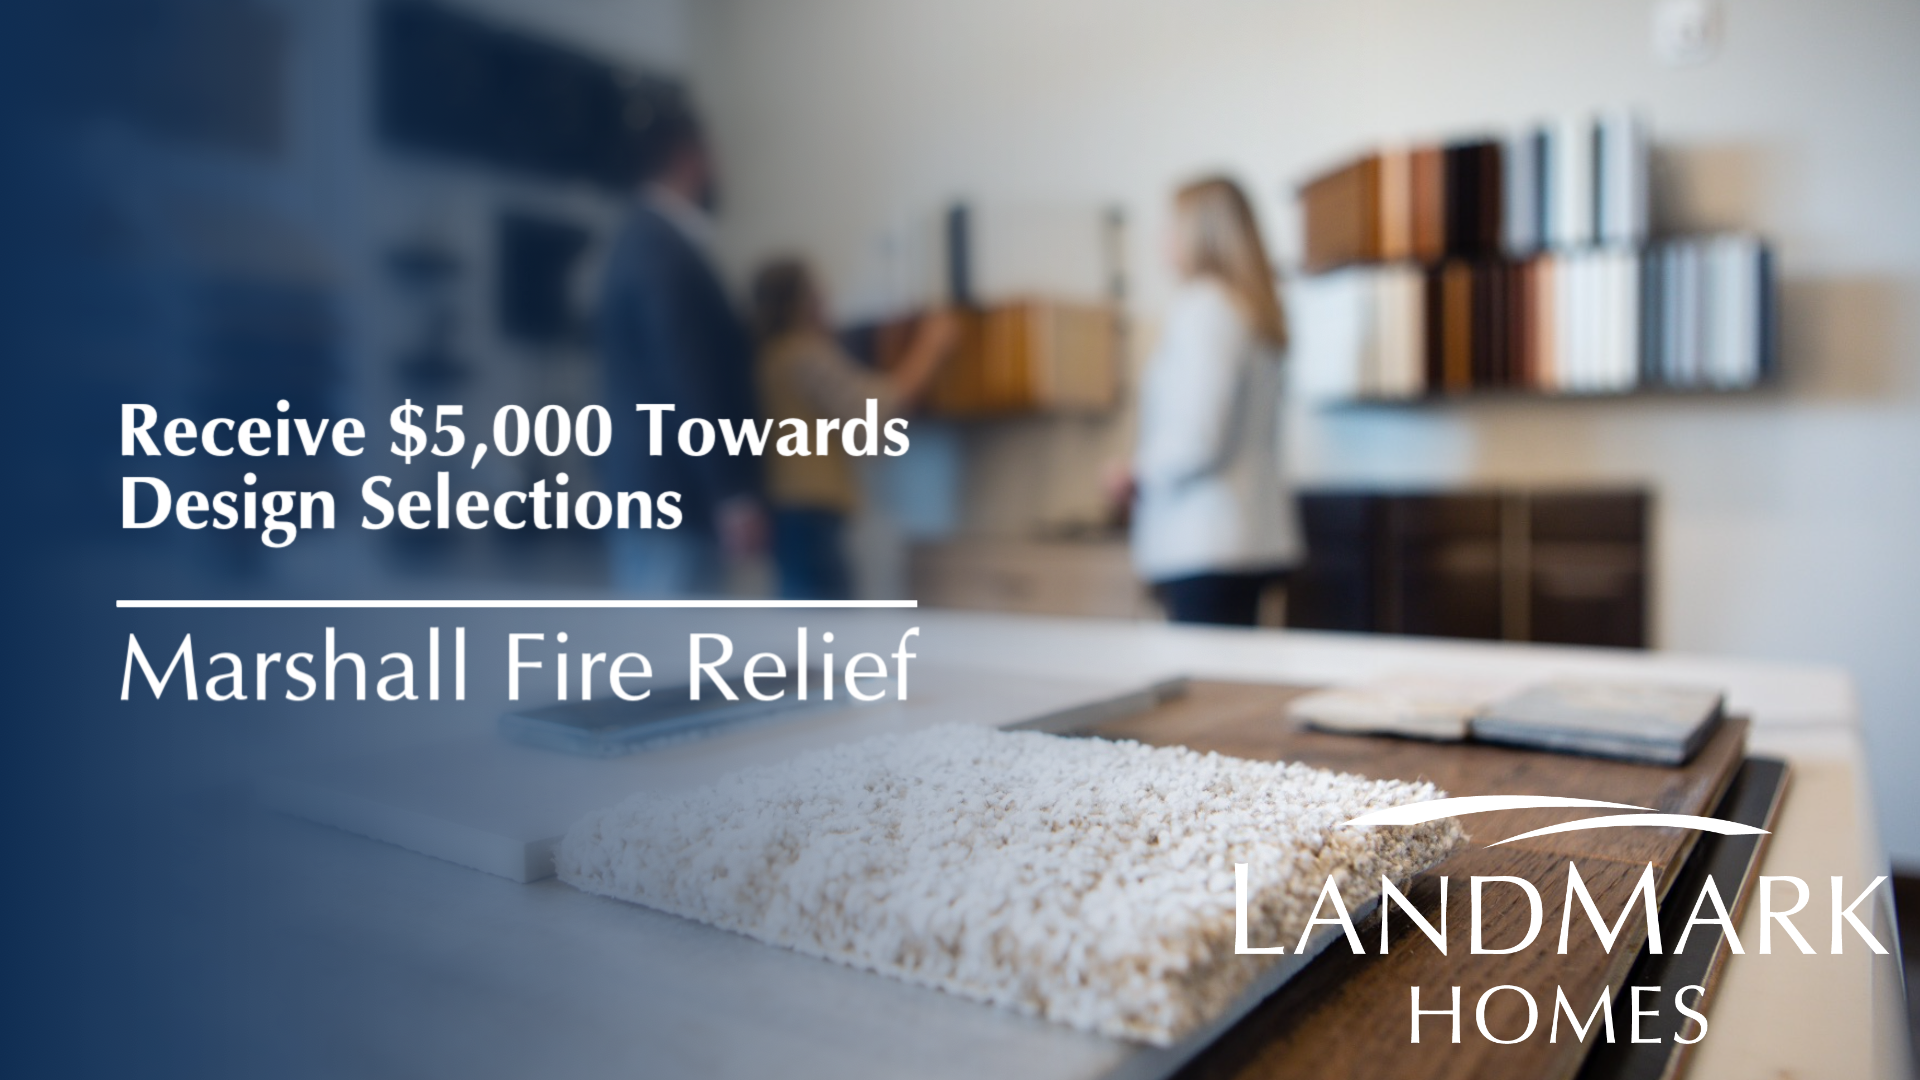 Marshall Fire Relief: New Home Incentive from Landmark Homes